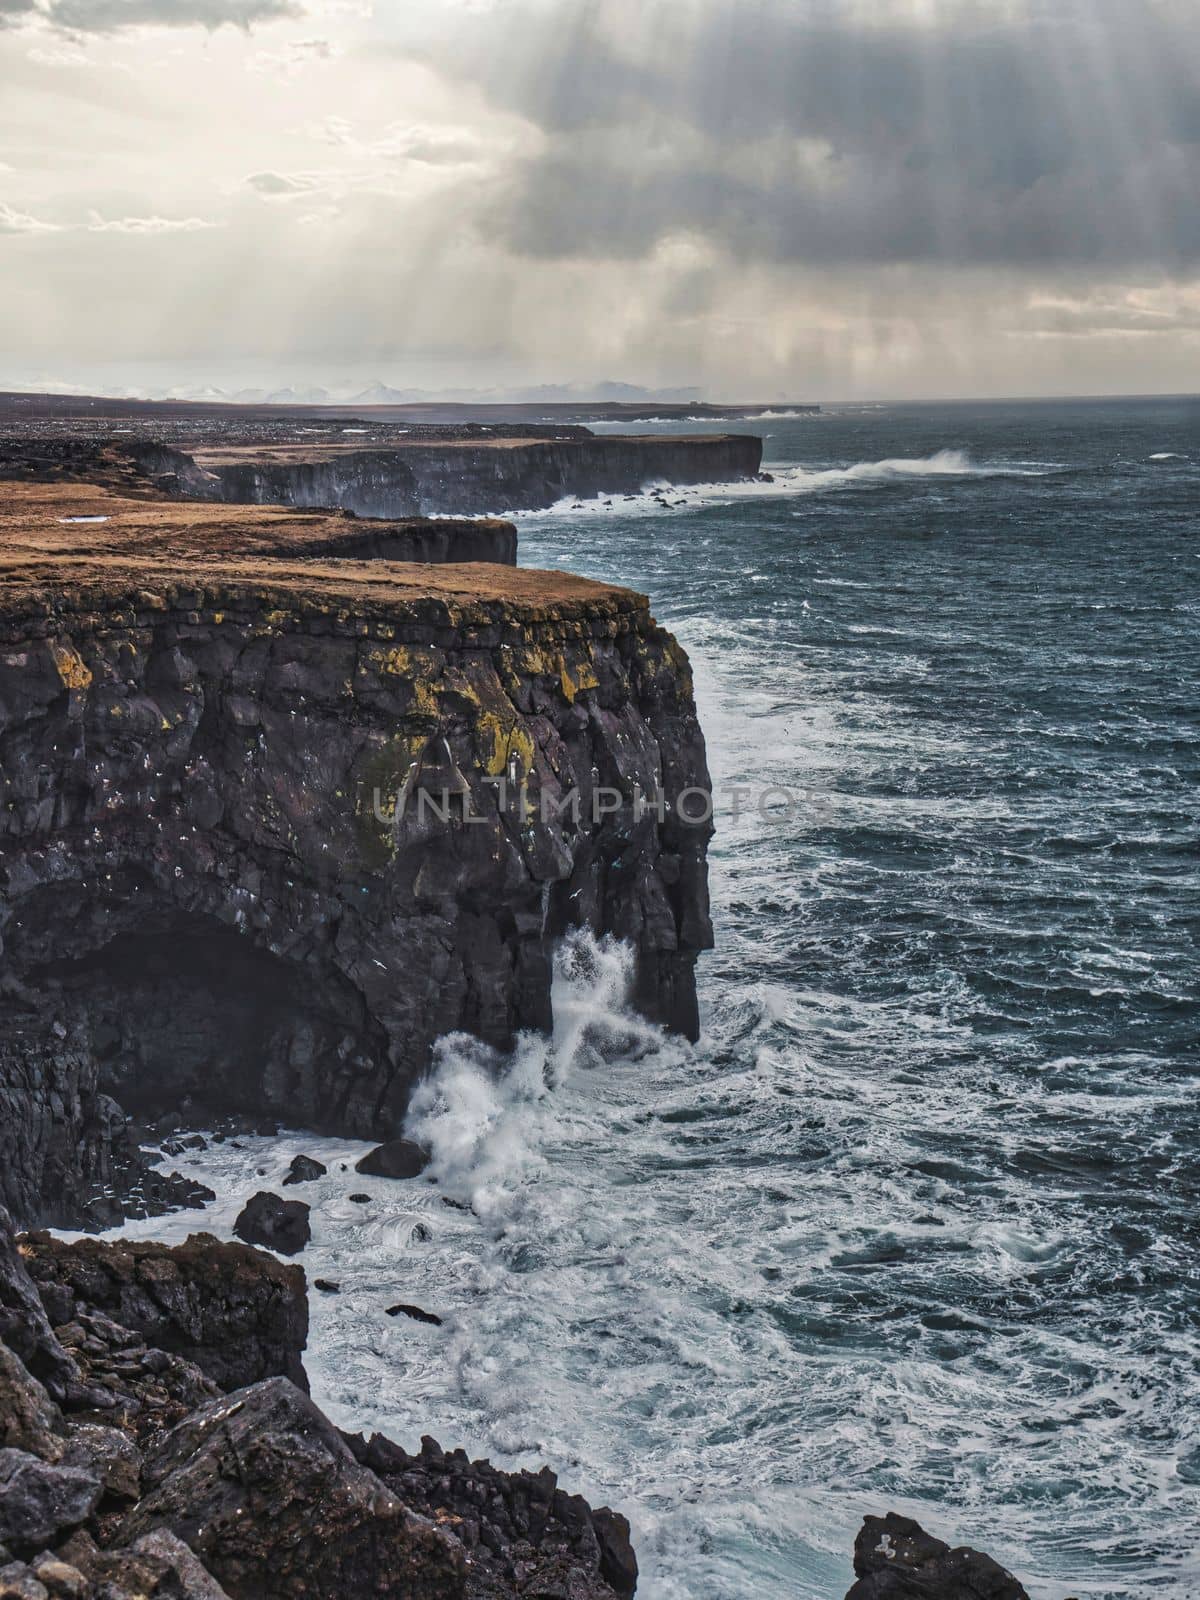 Cold sea water crashing against rocks near rough stony cliffs, on stormy day in Iceland